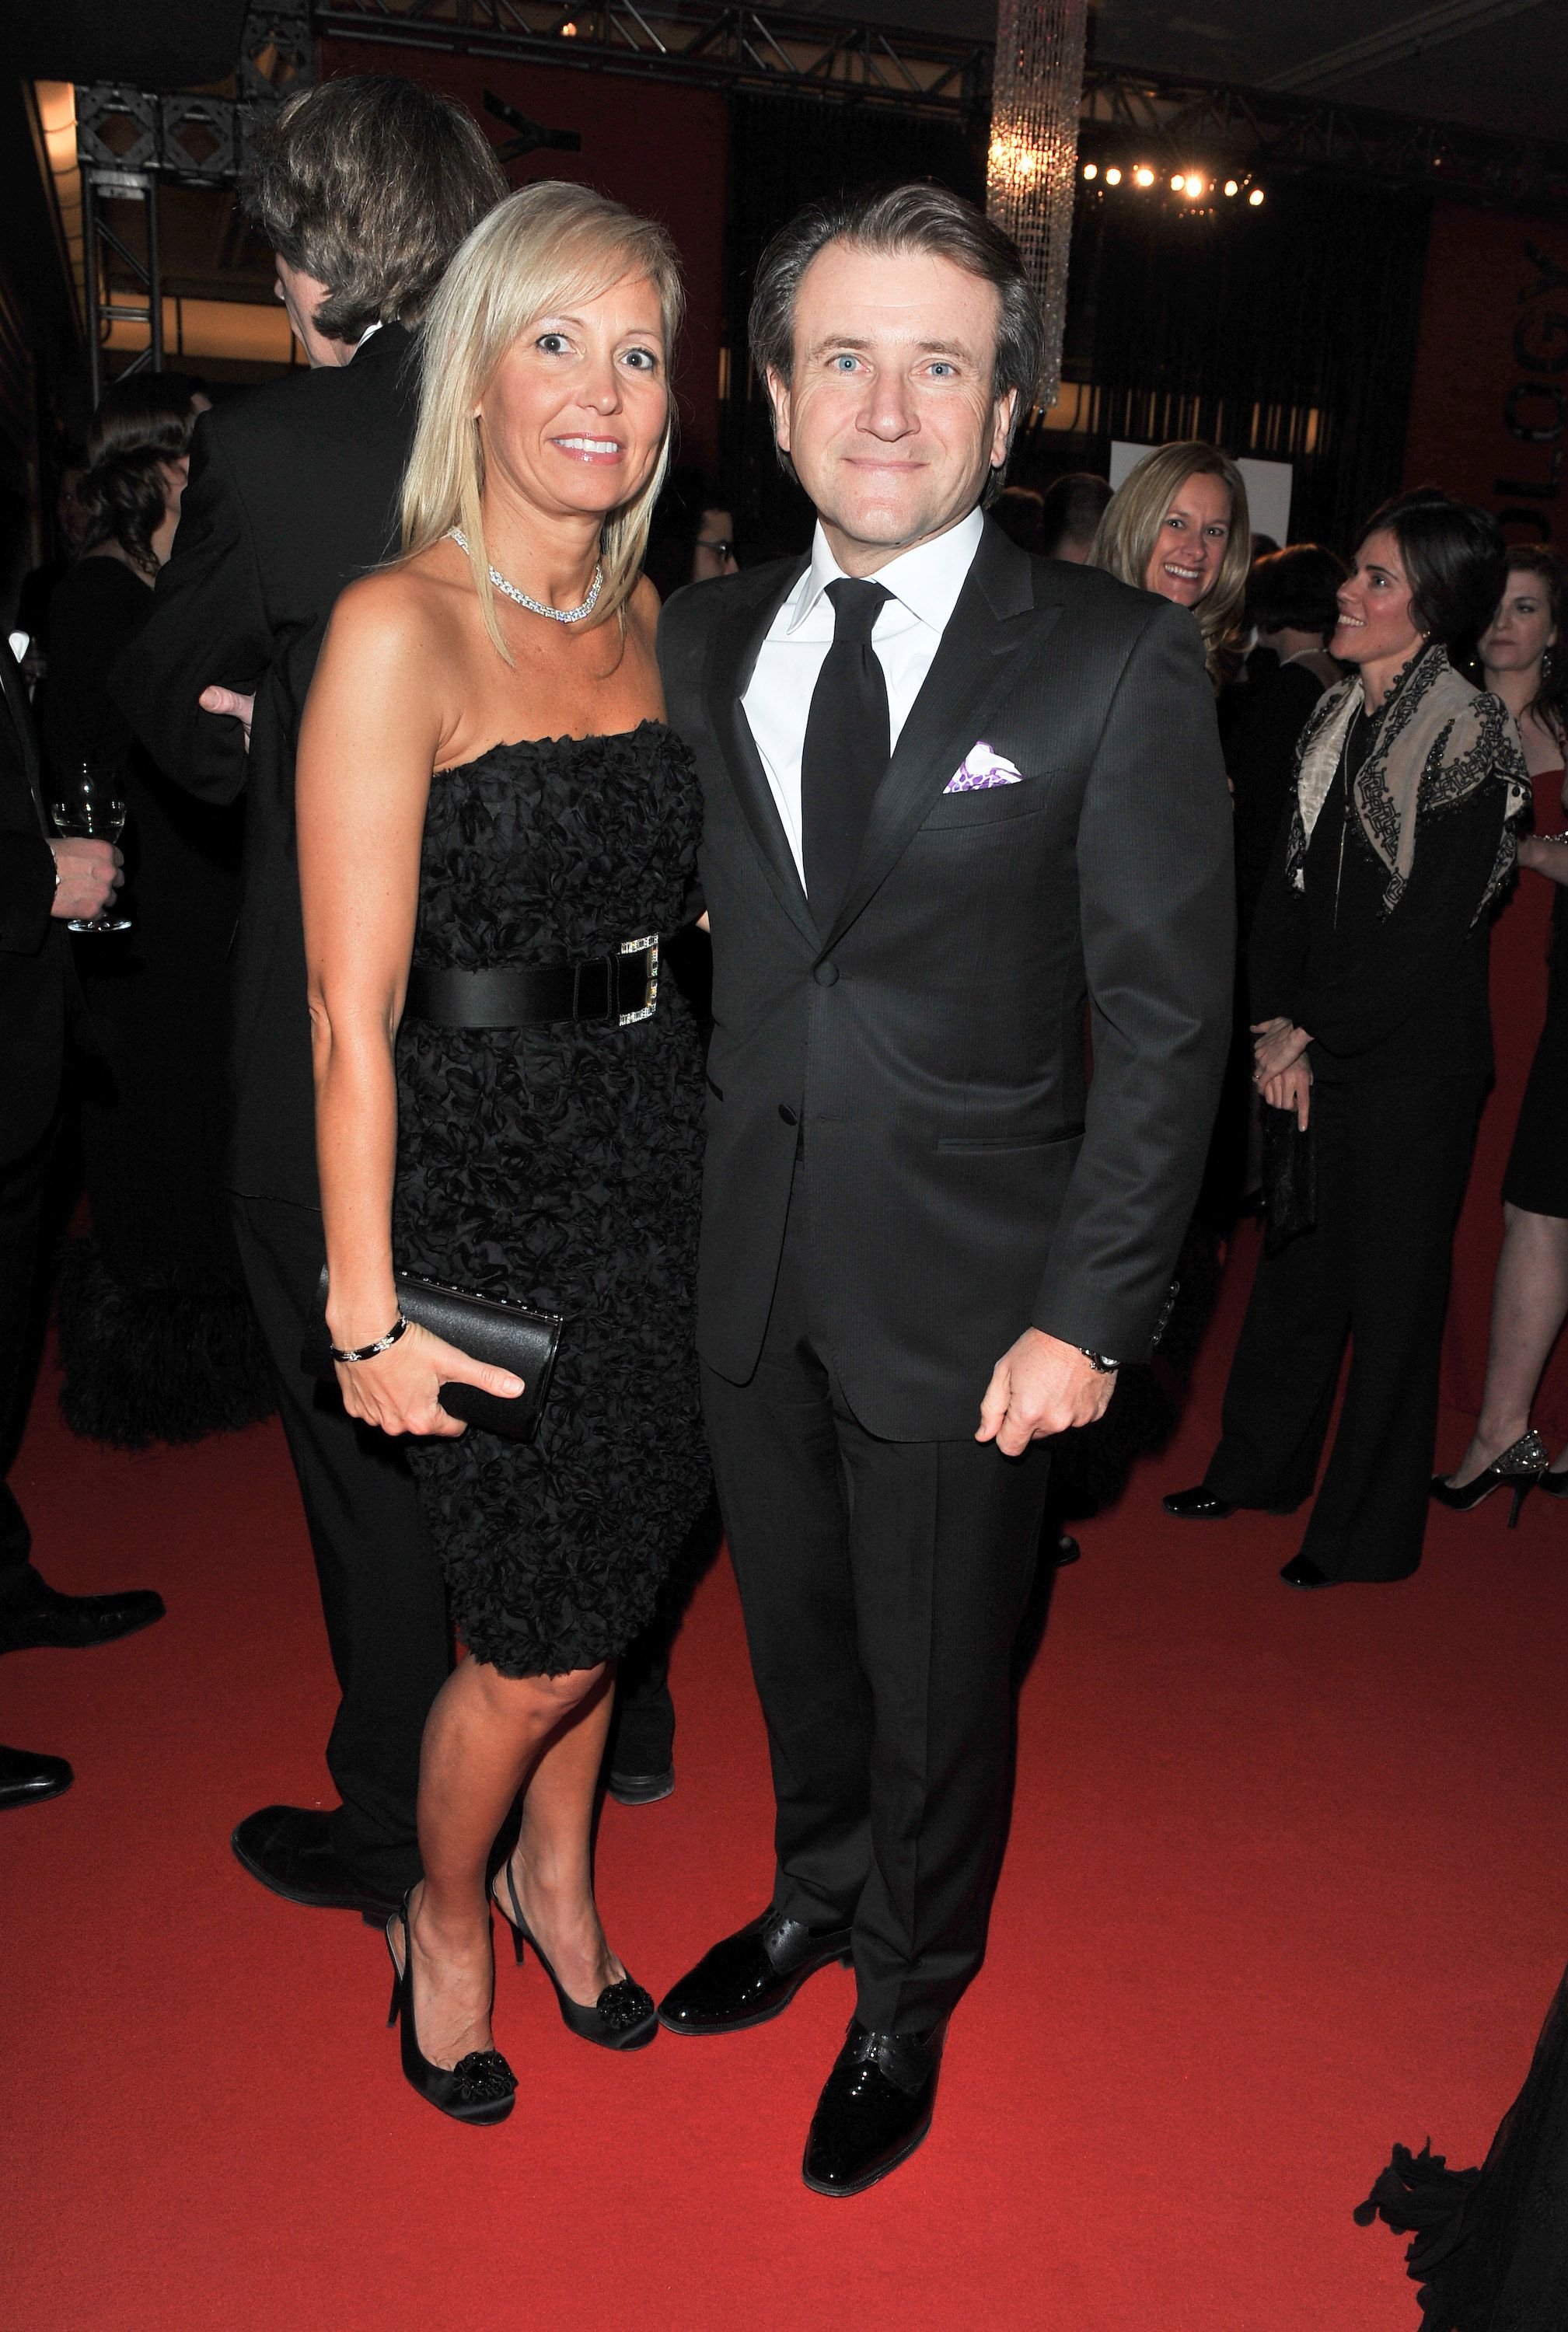 Diane Plese and Robert Herjavec at the Canadian Film Centre Gala and Auction at The Carlu on February 9, 2011, in Toronto, Canada | Photo: George Pimentel/WireImage/Getty Images